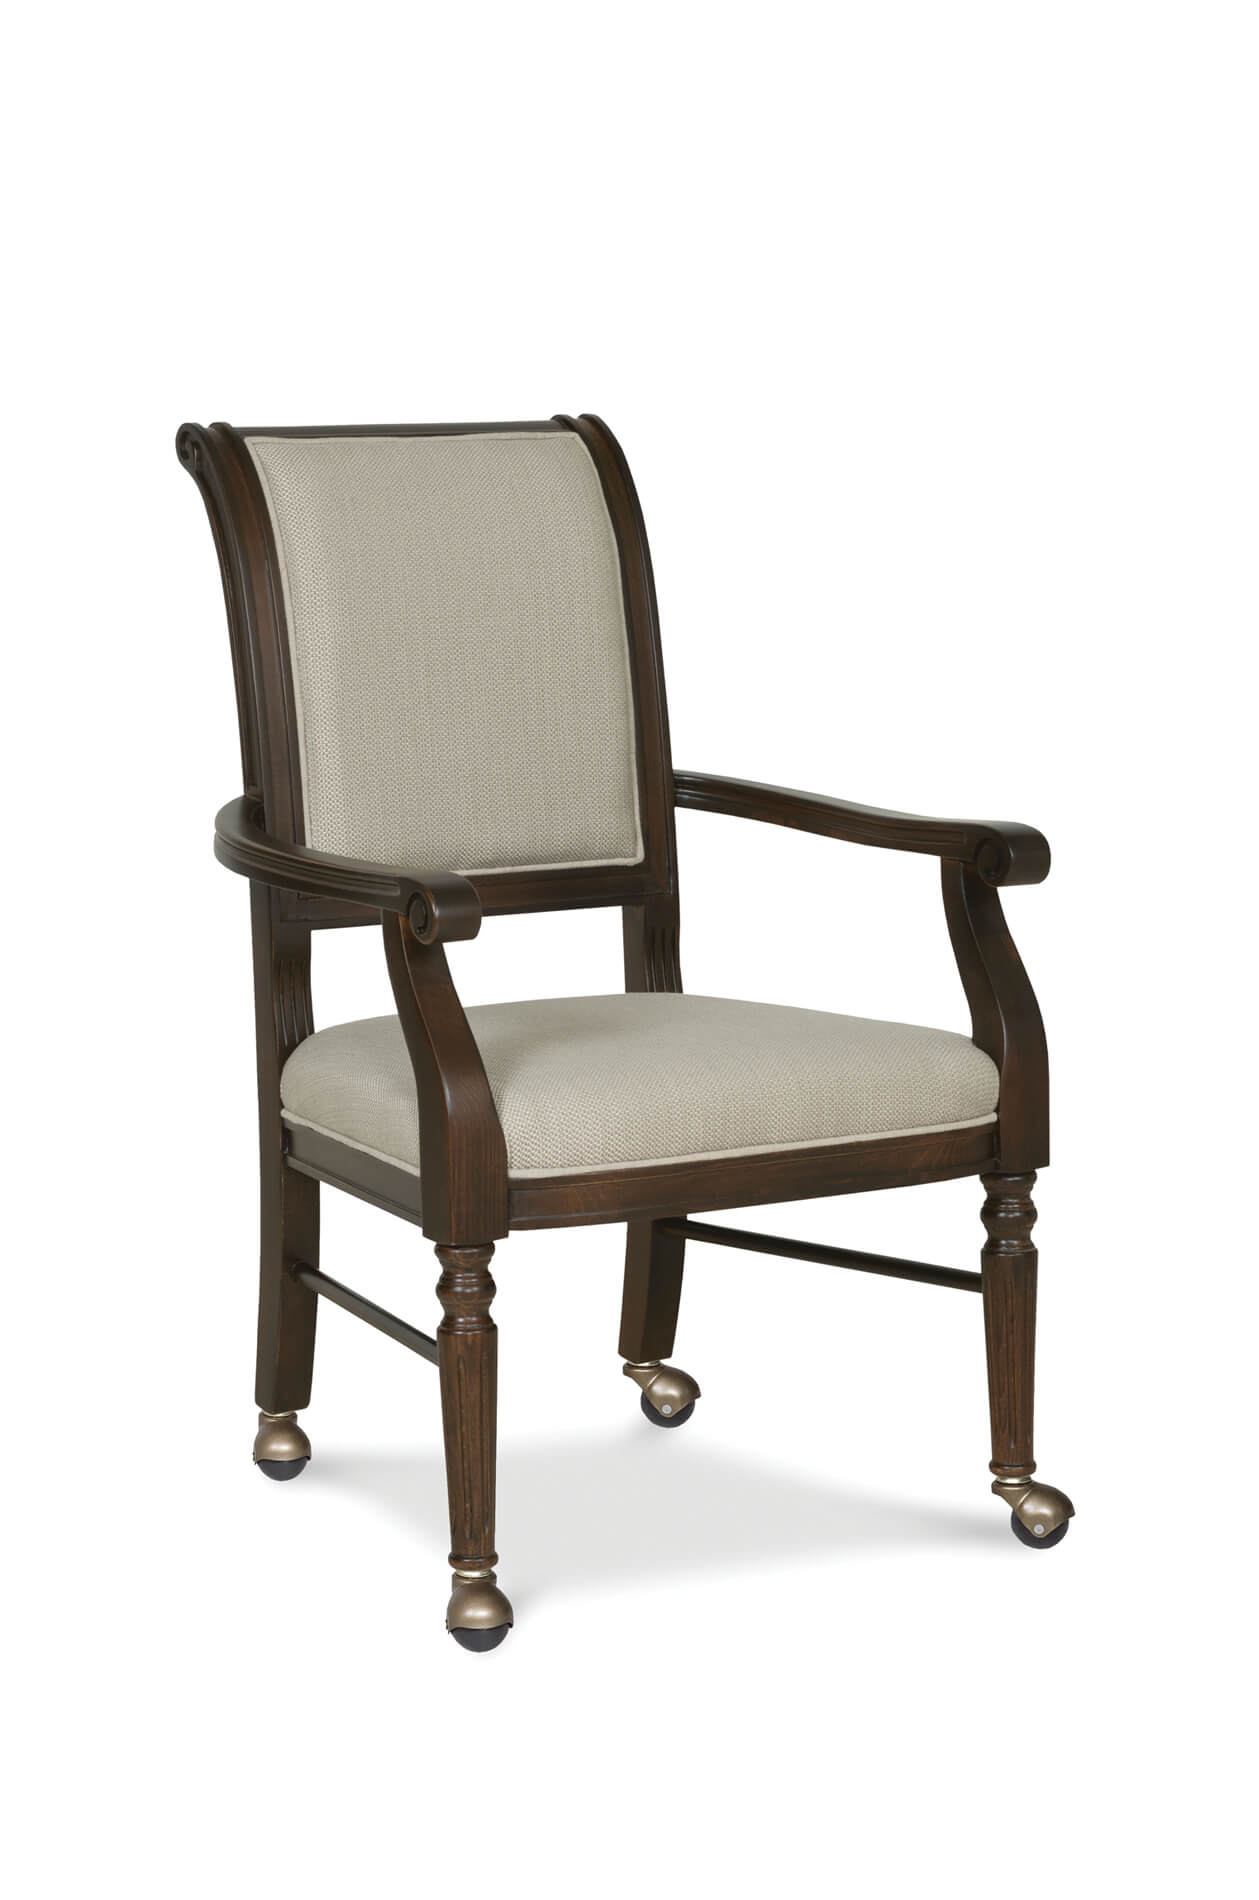 Delano Dining Arm Caster Chair, Padded Kitchen Chairs With Casters